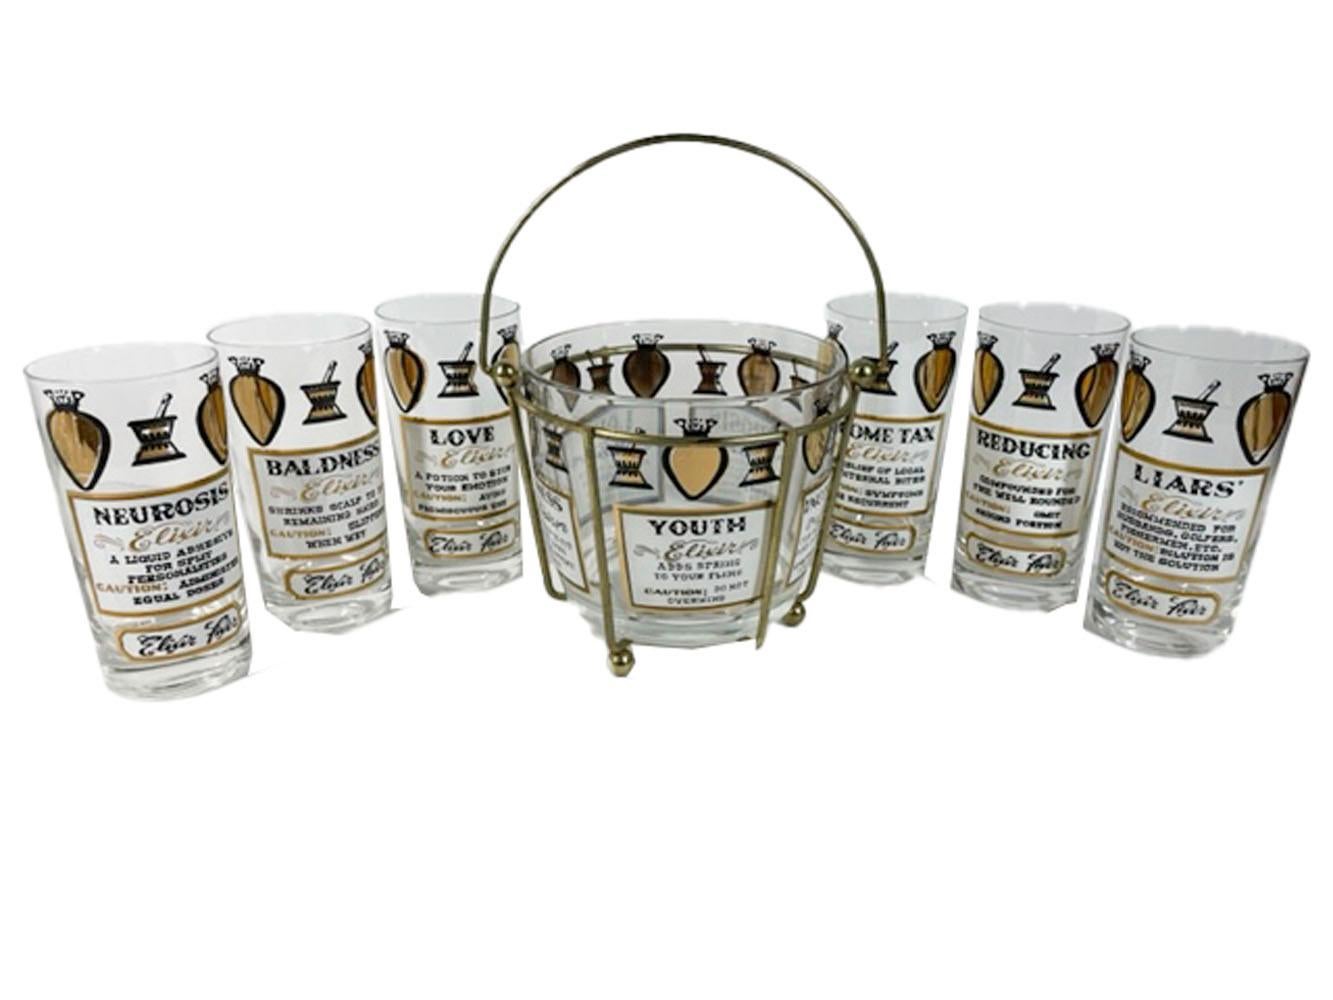 20th Century 7 Piece Vintage Elixir Fixer Ice Bucket Set with Various Ailments and Remedies 